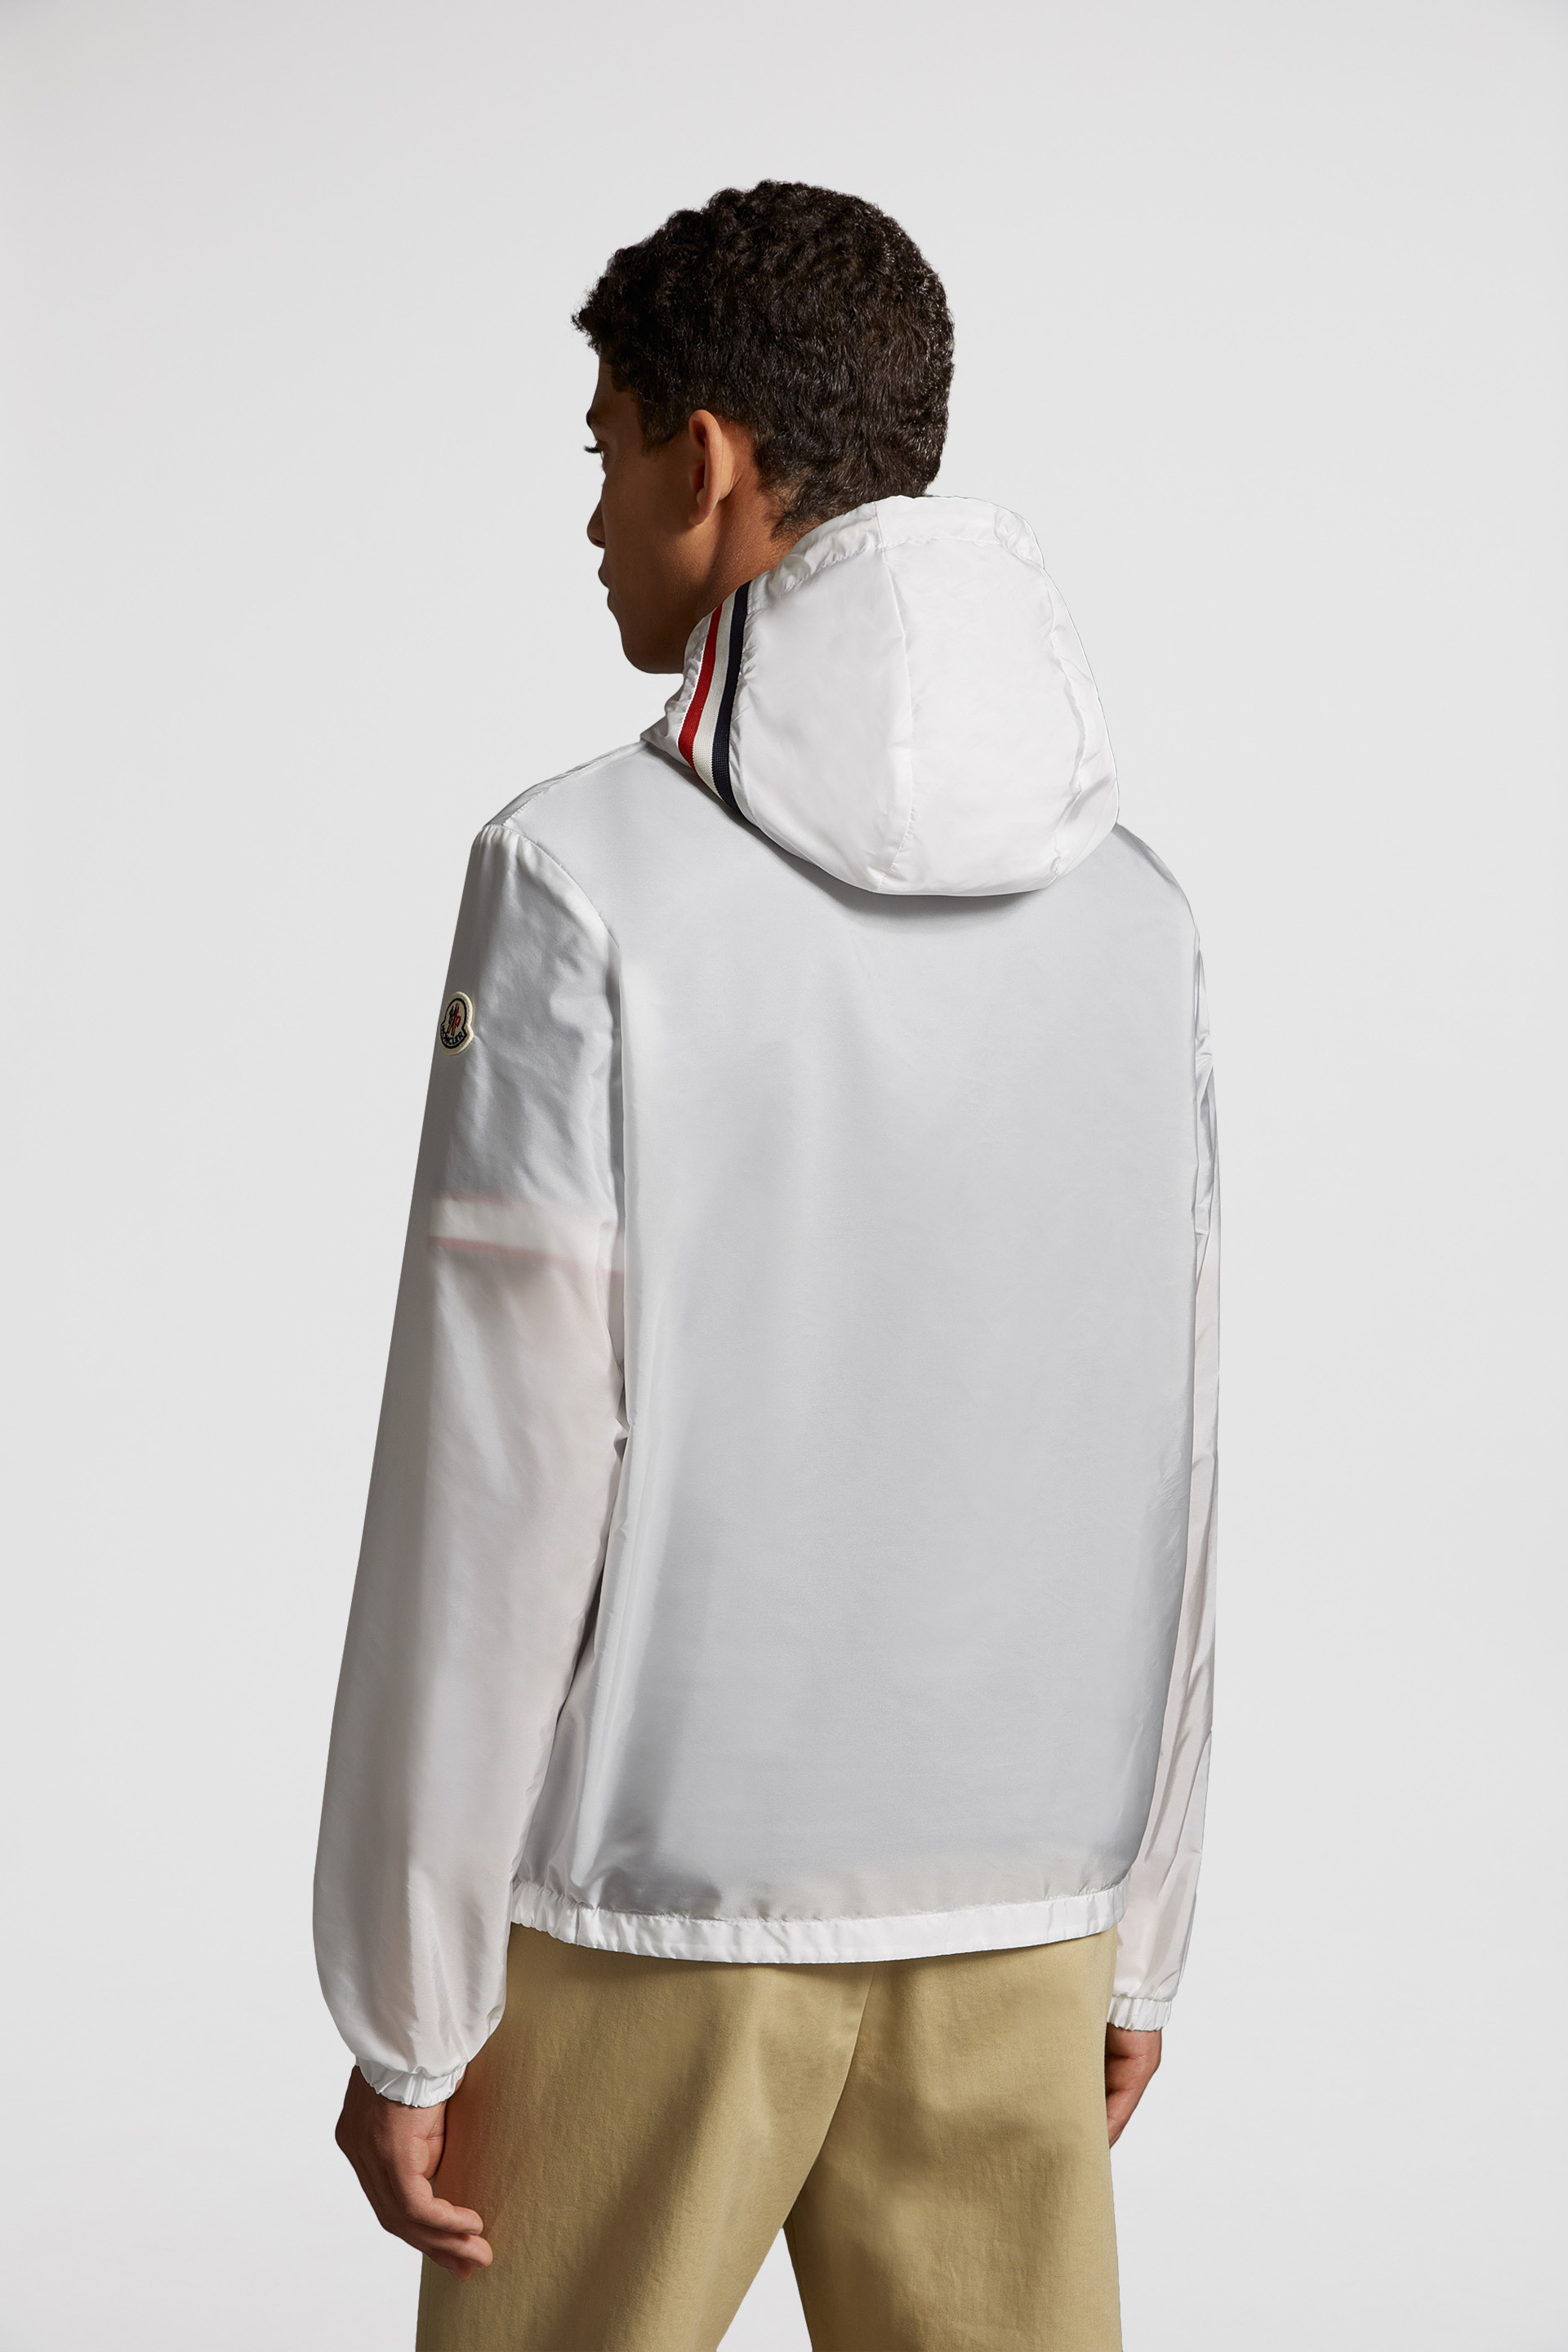 Moncler Canada Online Shop — Down jackets, coats, and clothing